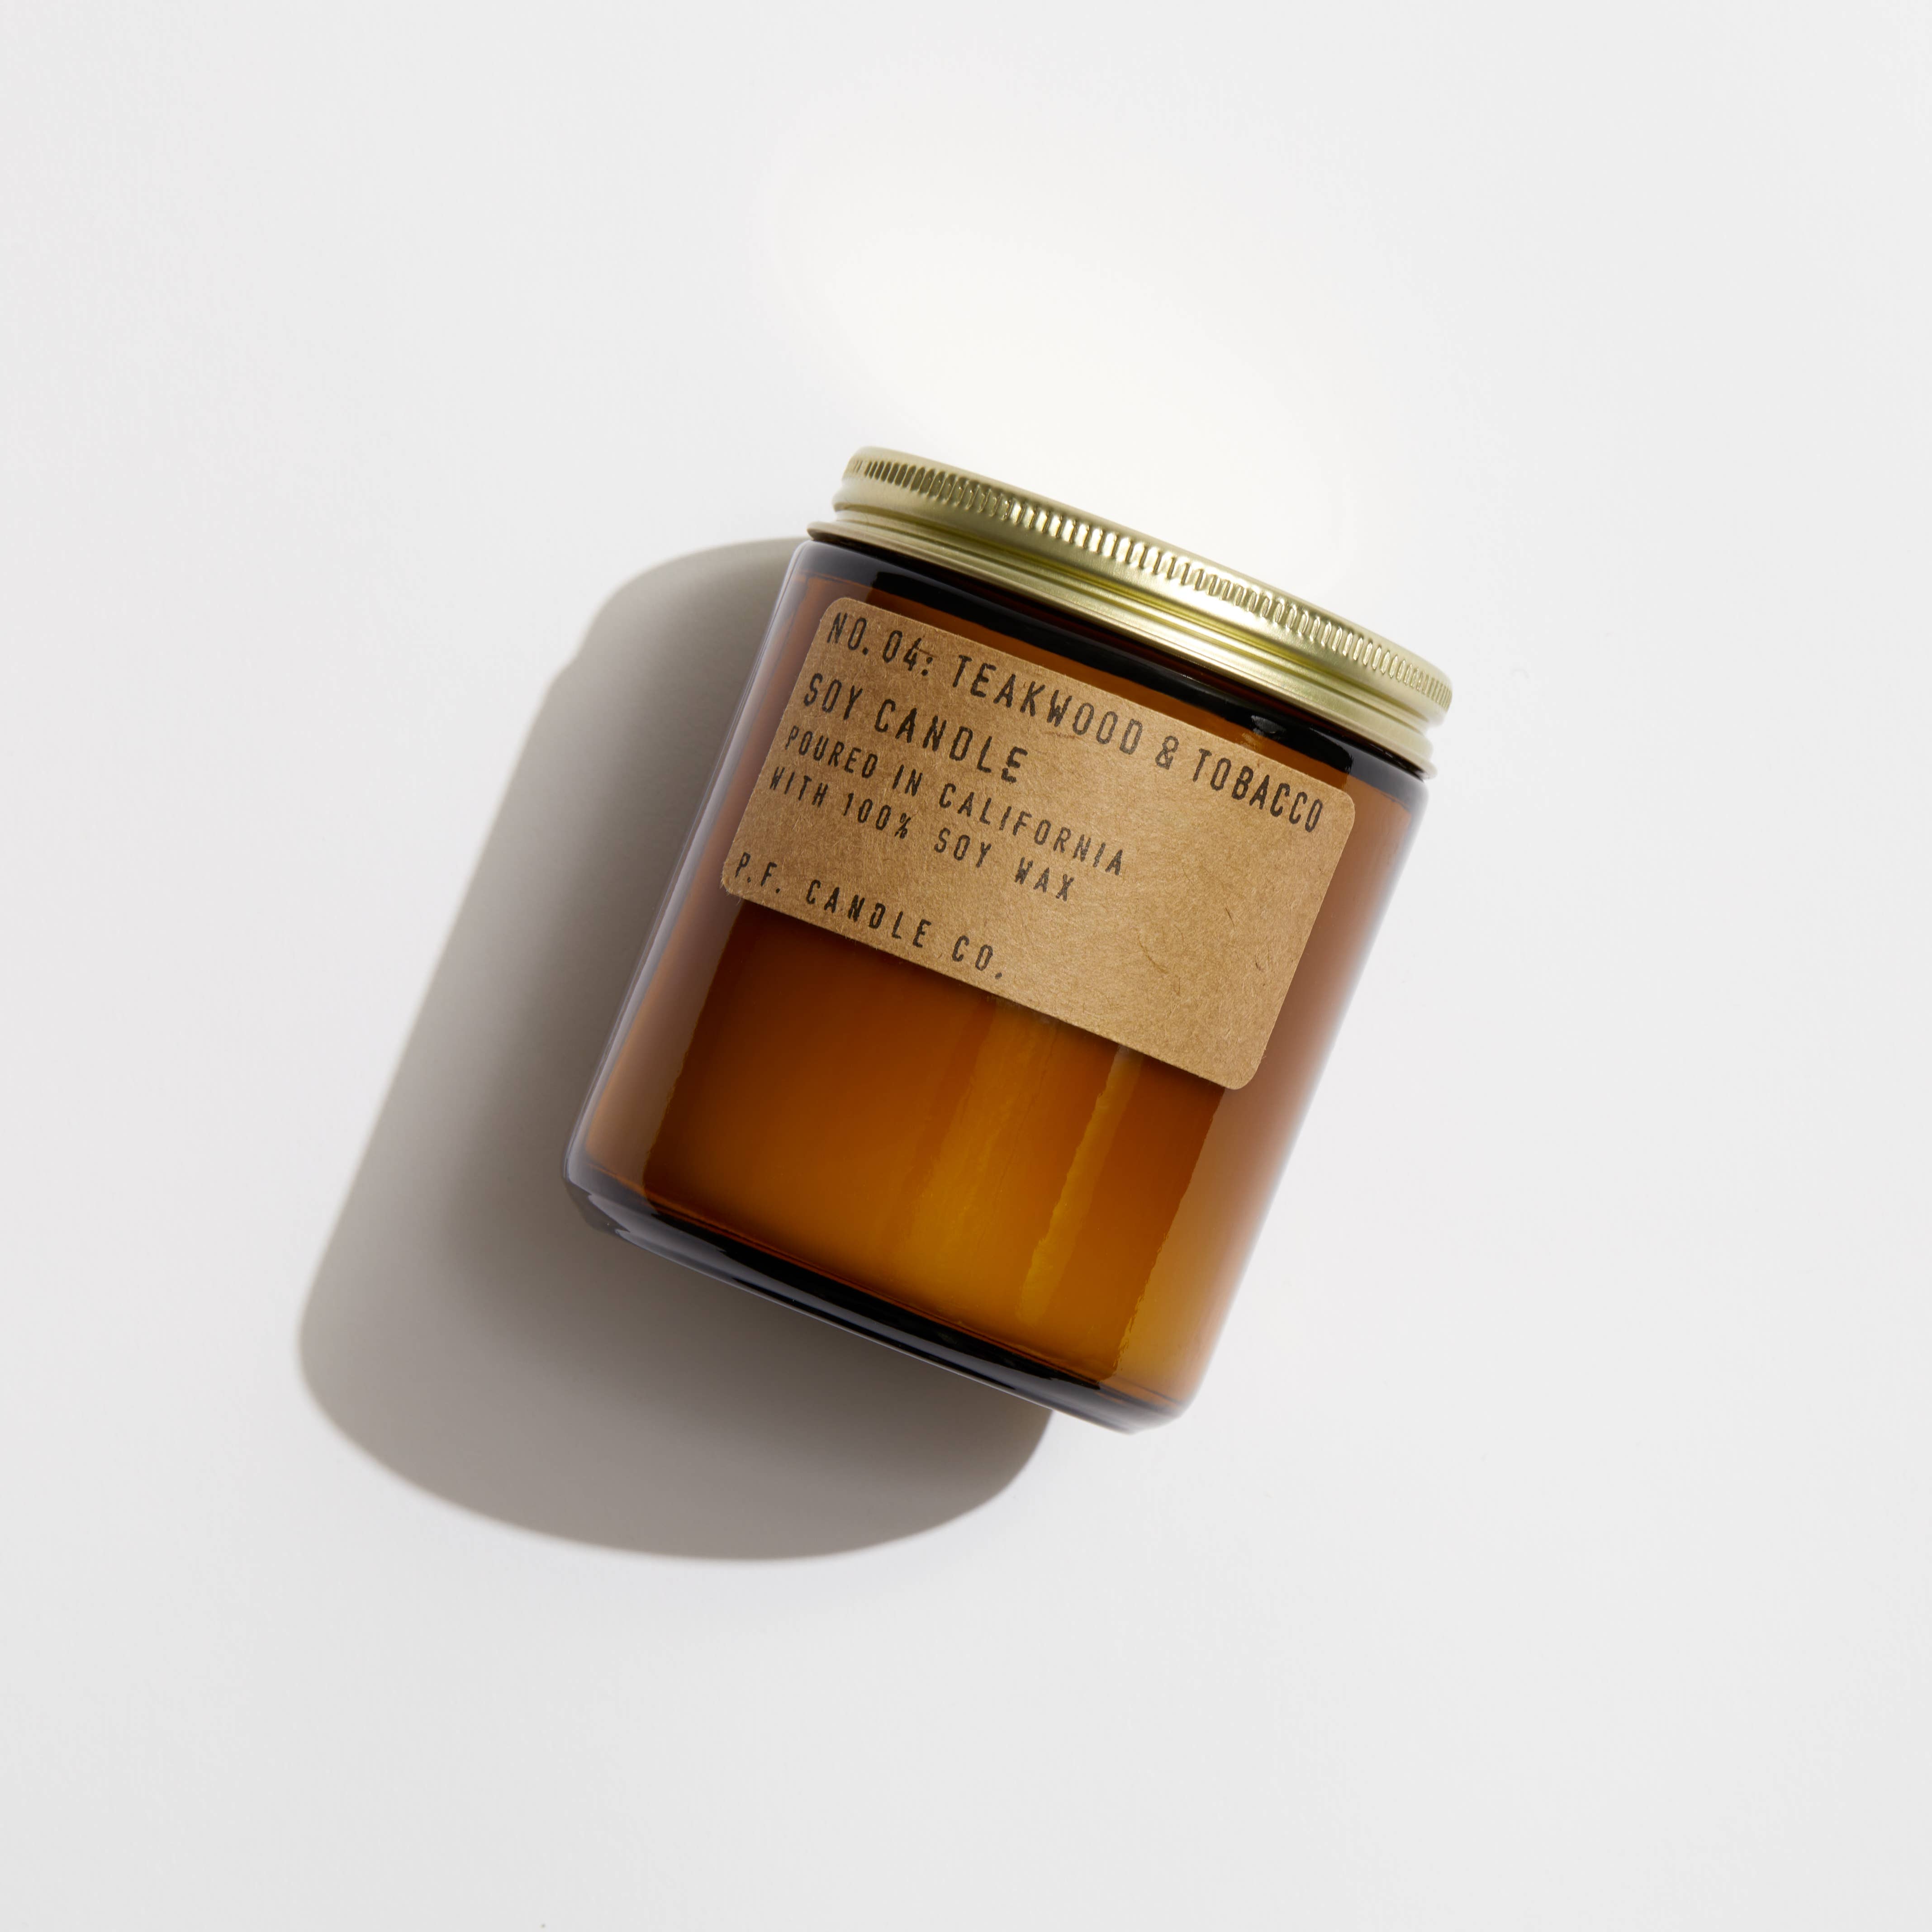 P.F. Candle Co. Standard Soy Candle - Teakwood & Tobacco